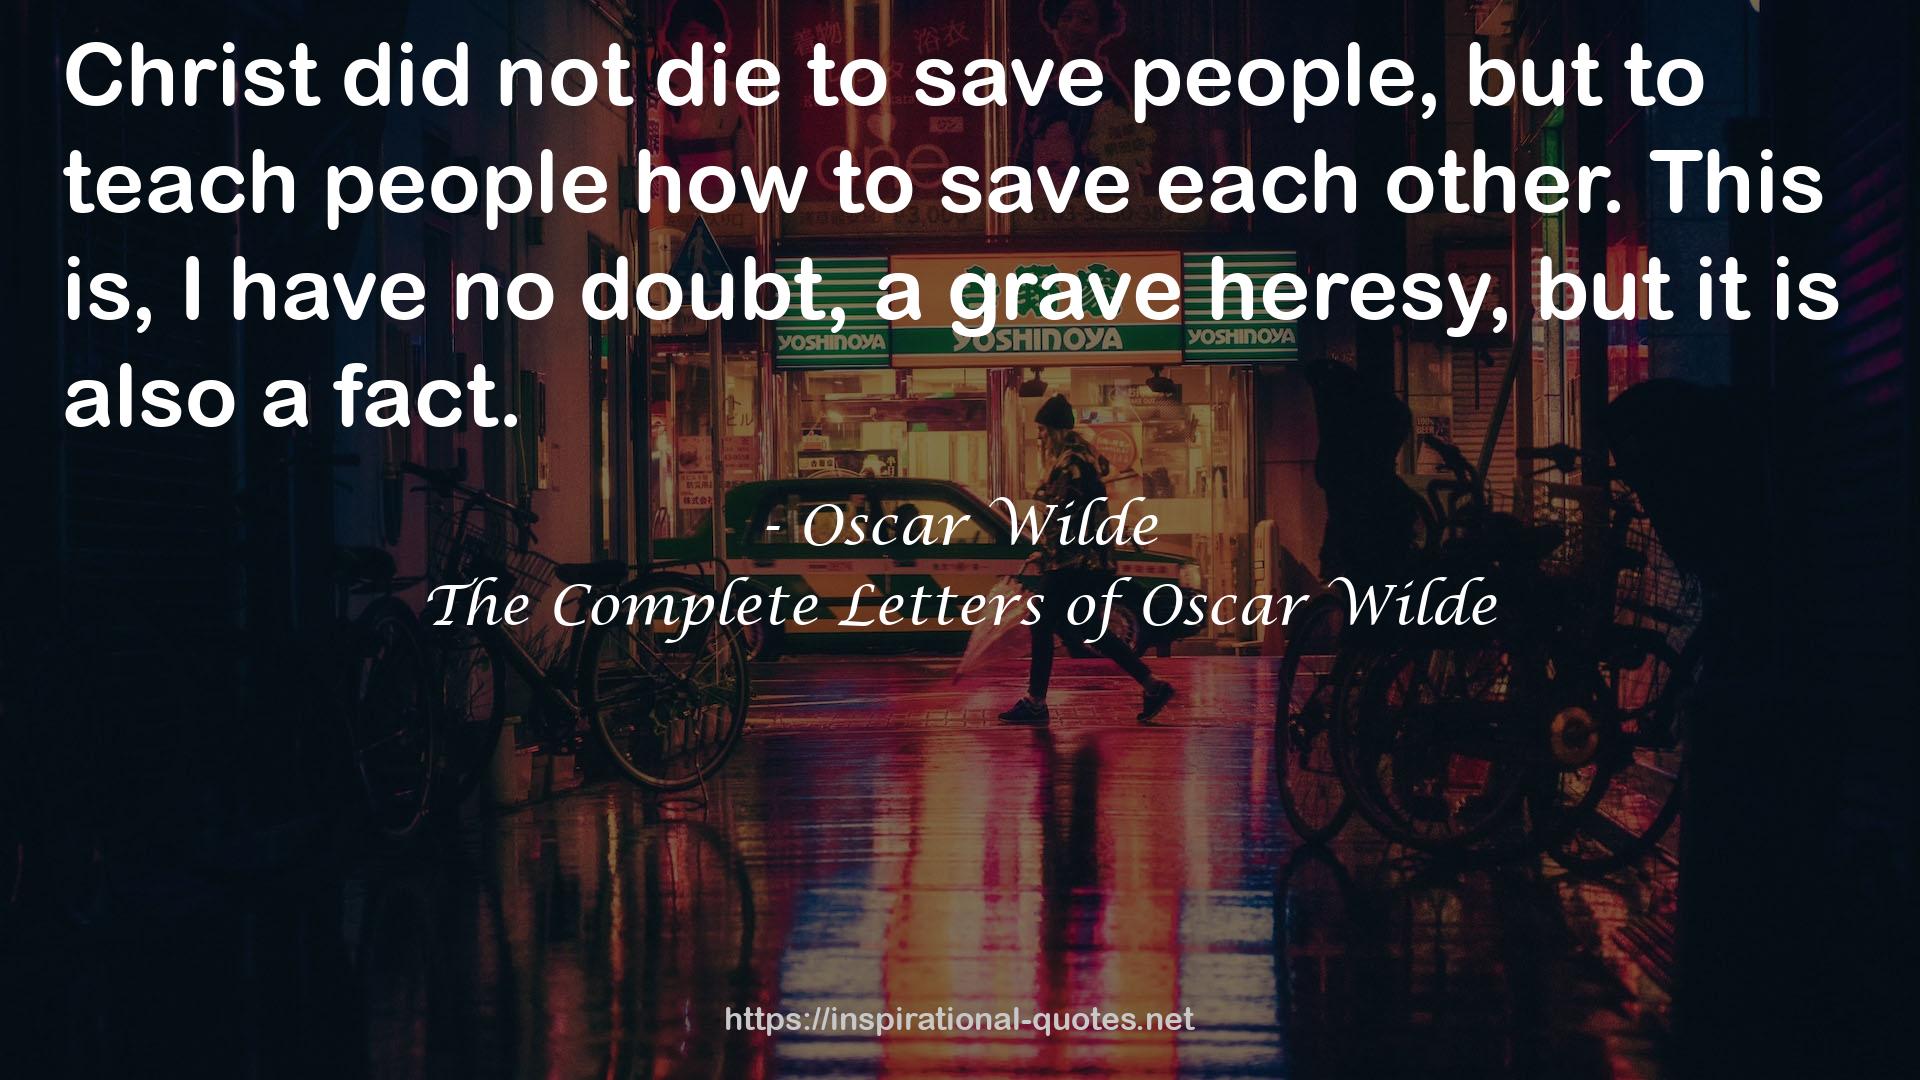 The Complete Letters of Oscar Wilde QUOTES